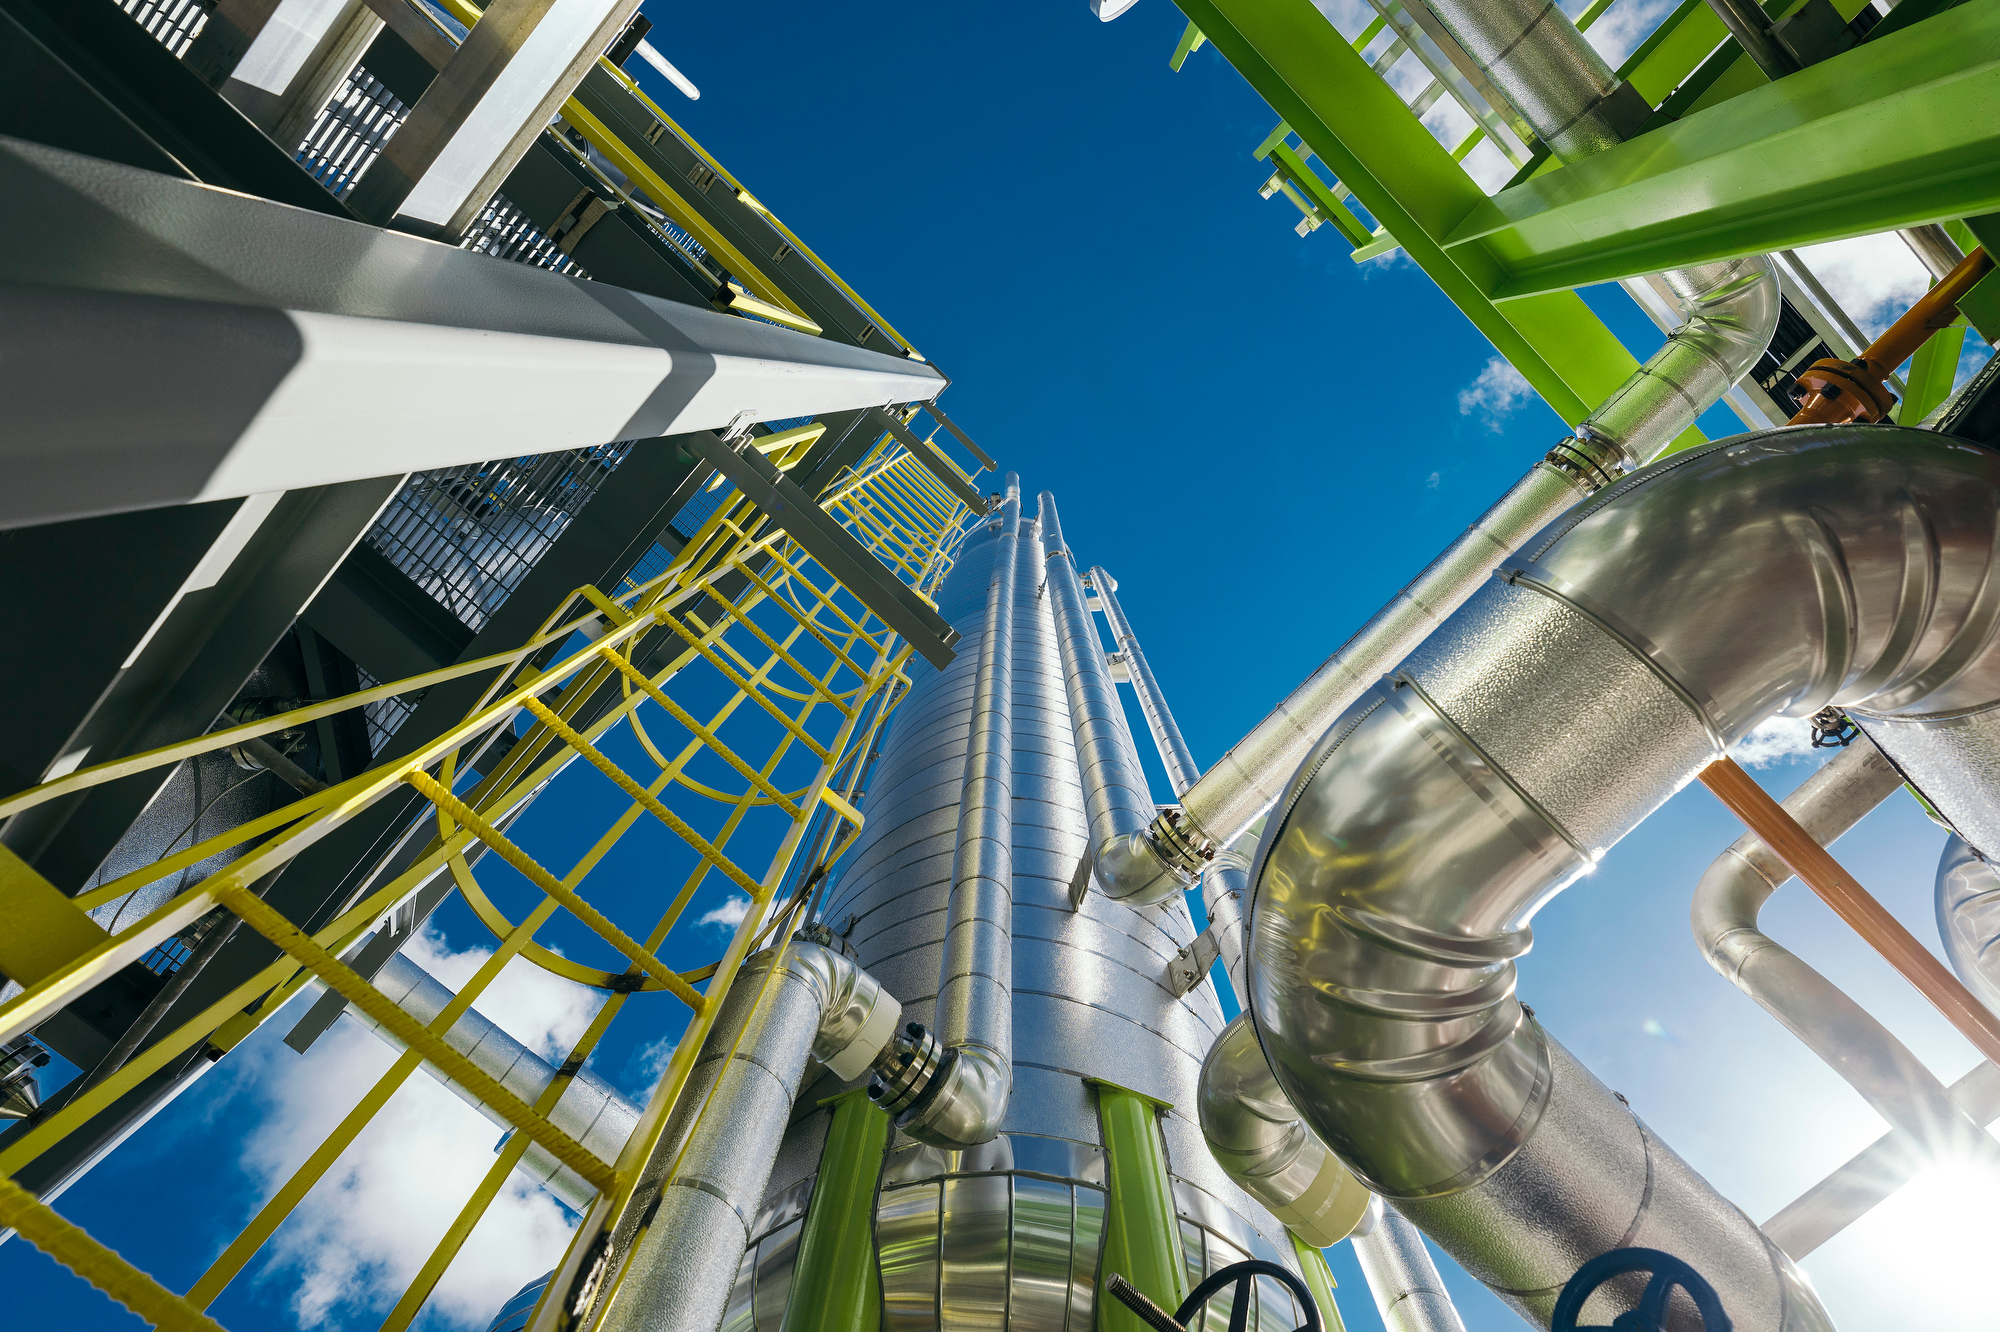 A chemical processing facility in Houston, Texas is photographed by Houston industrial photographer, Todd Spoth.